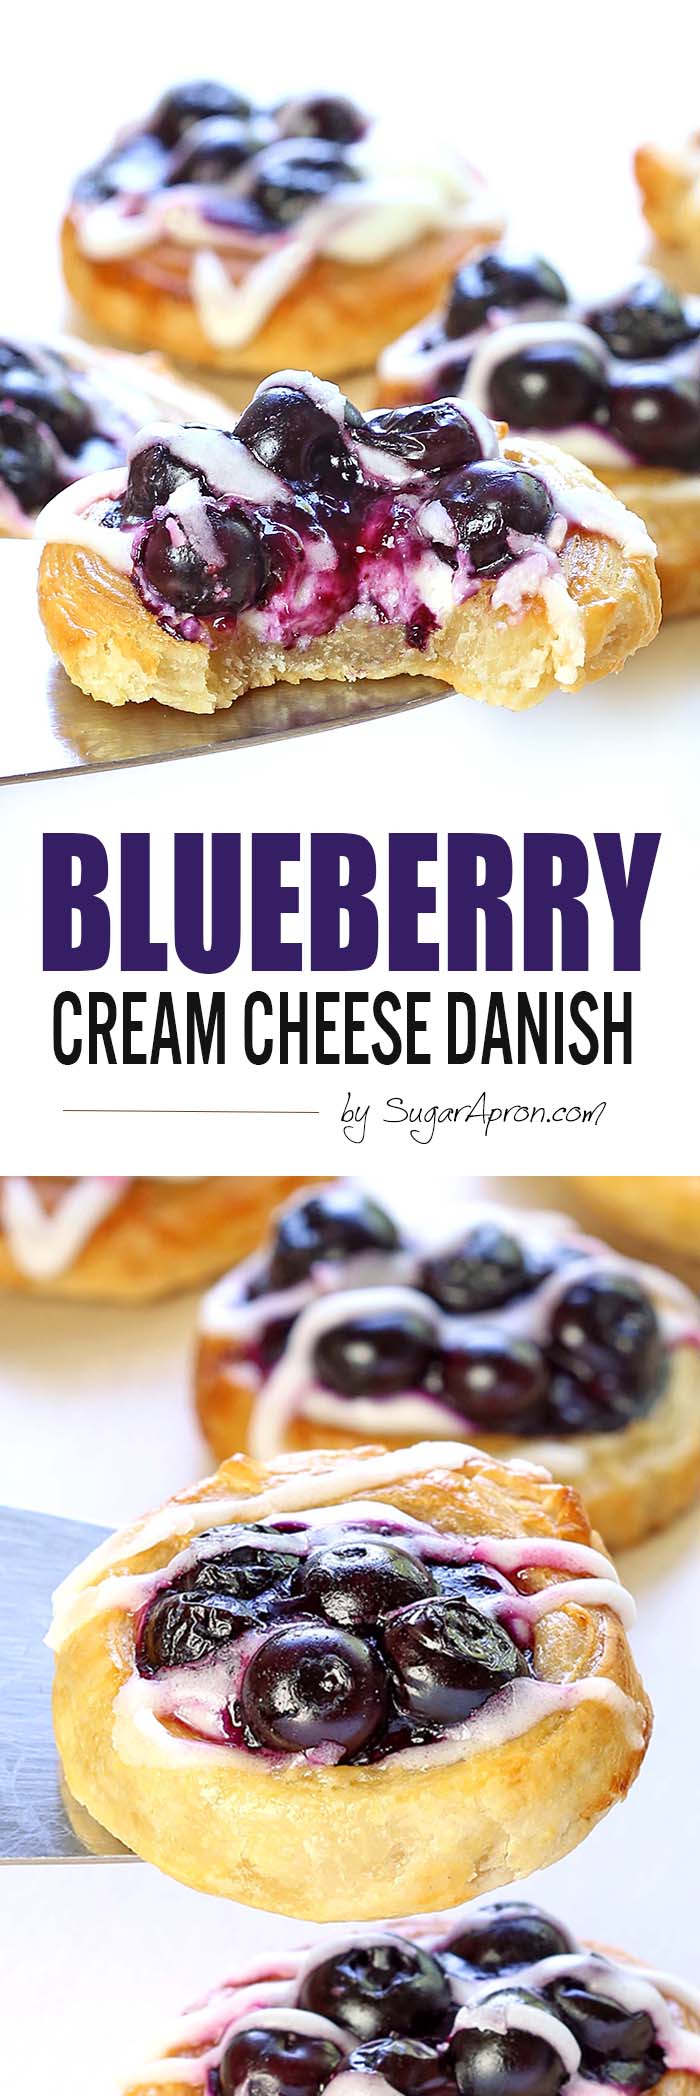  Are you ready for an easy breakfast recipe now? Grab a case of fresh blueberries or can of blueberry pie filling and refrigerated crescent rolls and let's get baking!